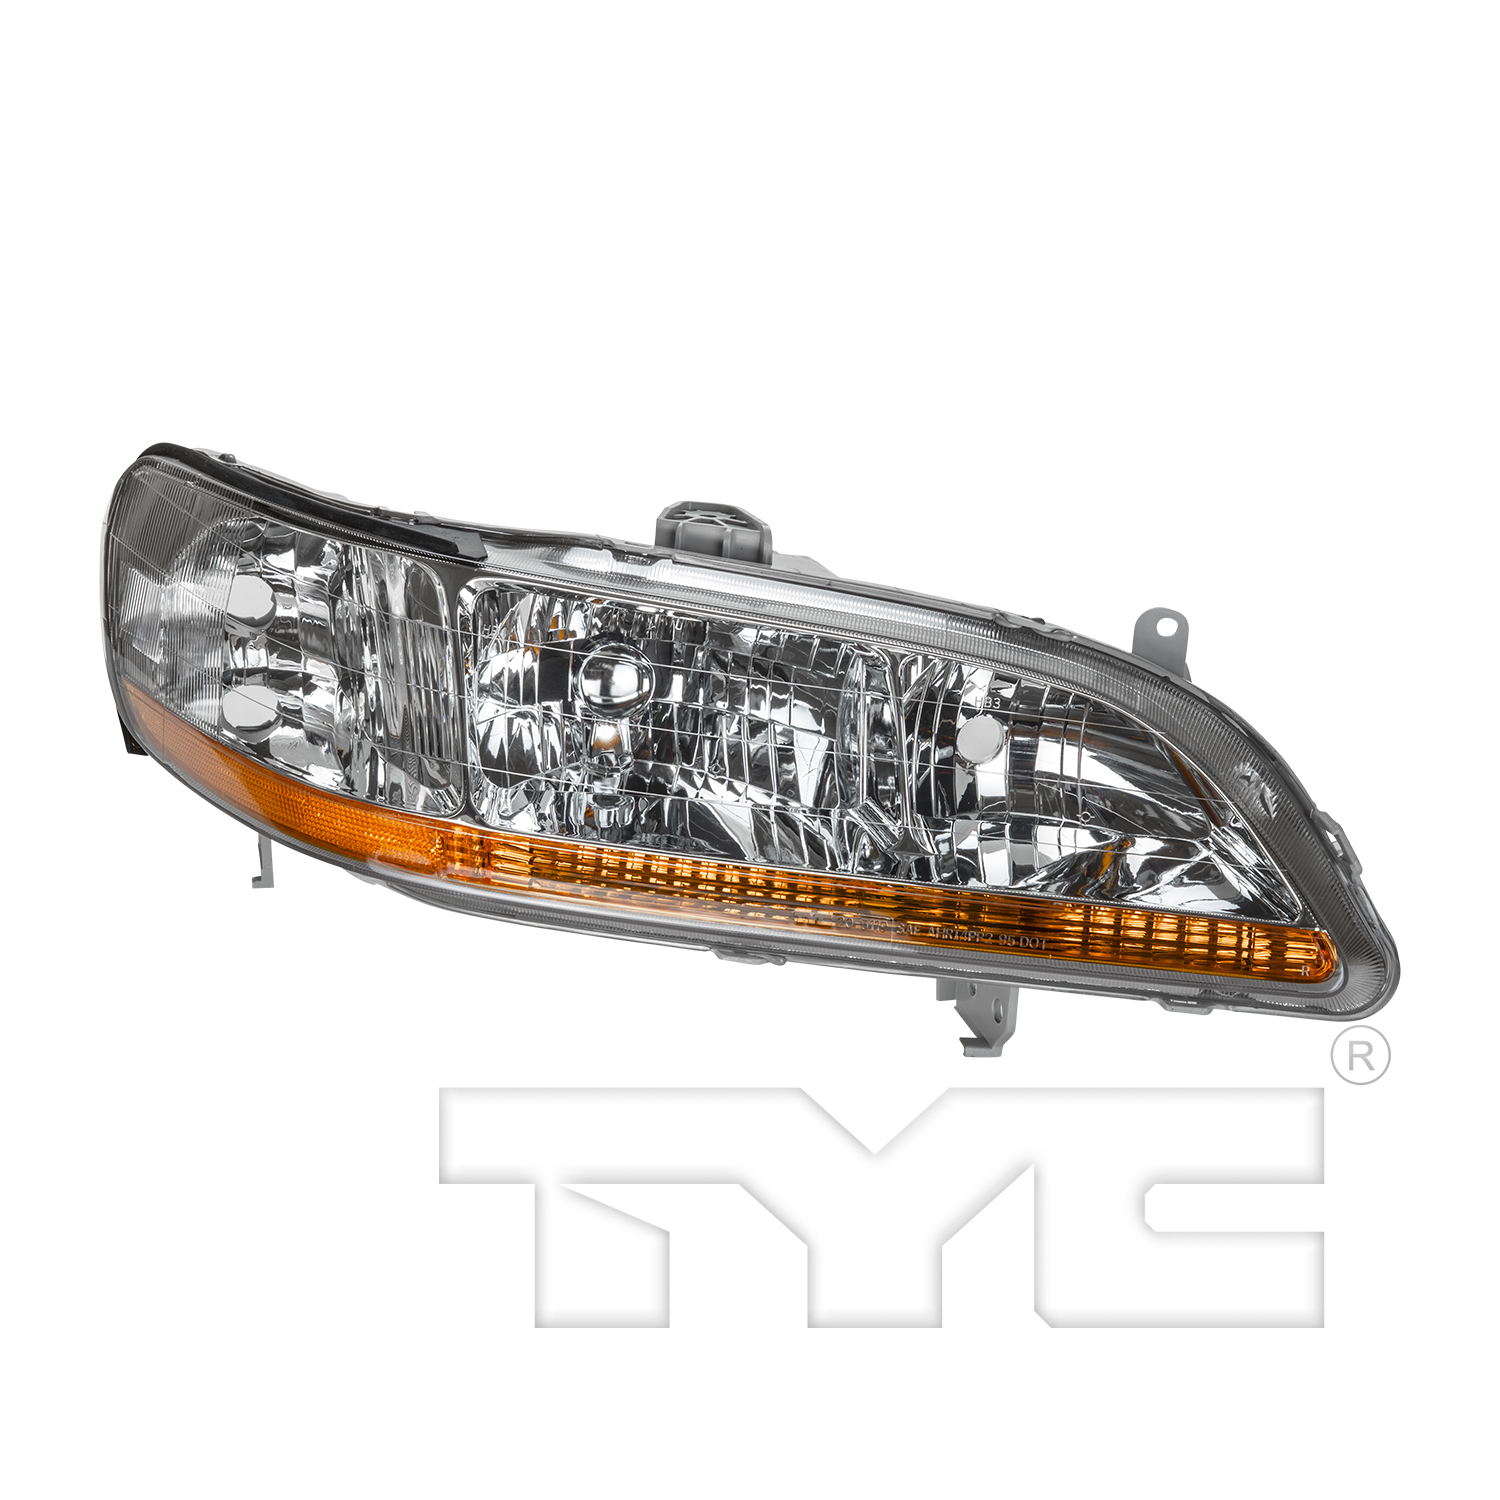 Aftermarket HEADLIGHTS for HONDA - ACCORD, ACCORD,98-00,RT Headlamp assy composite